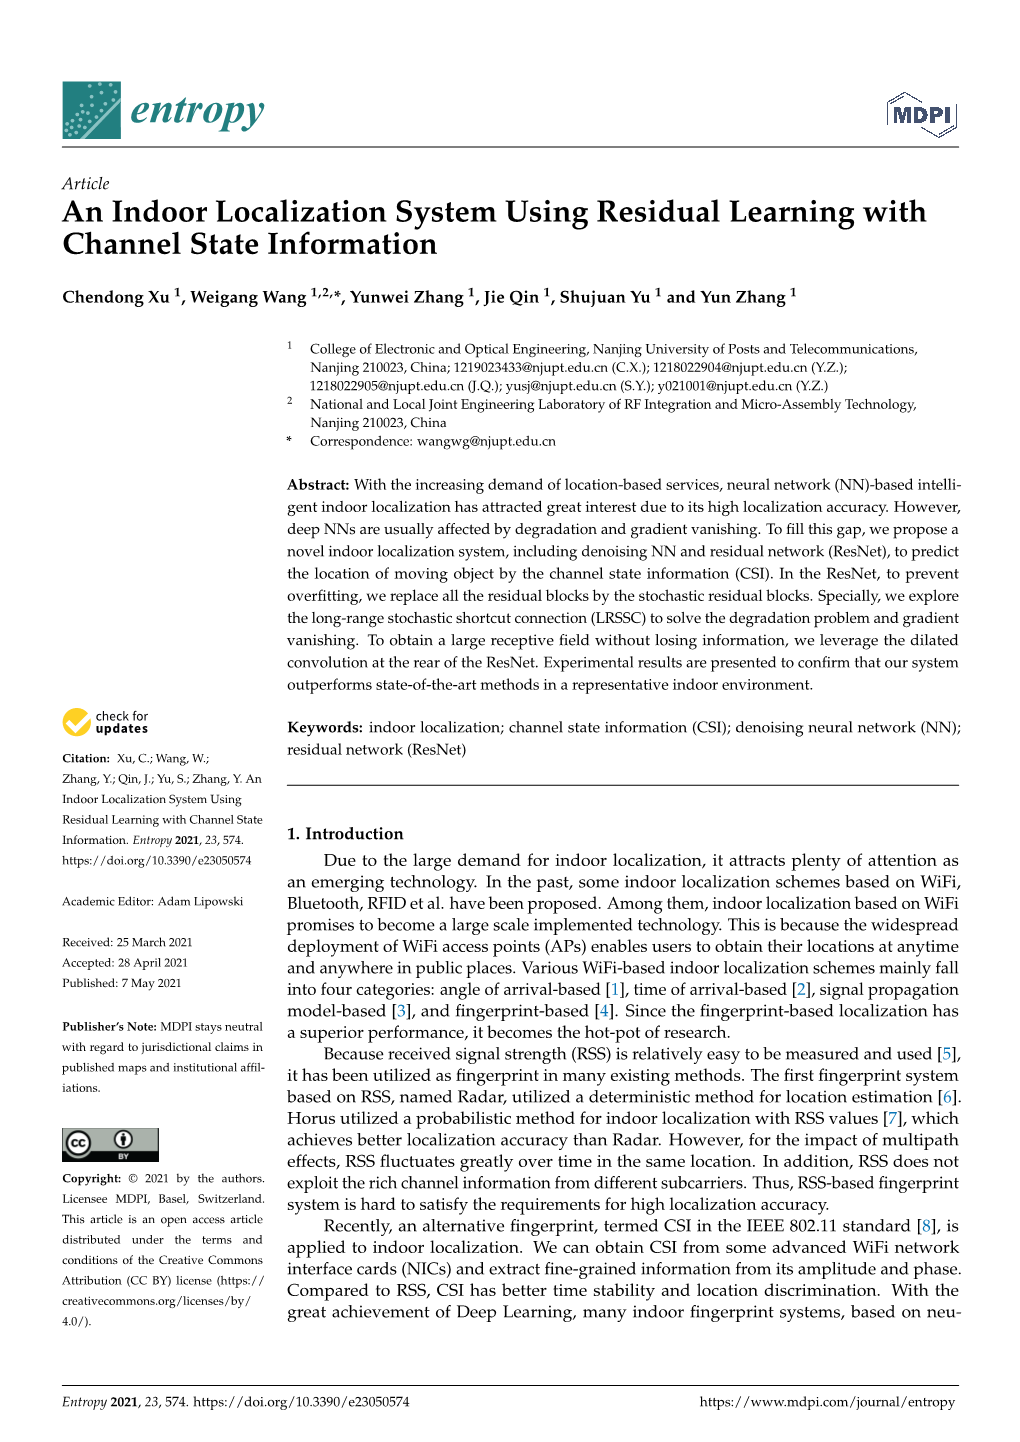 An Indoor Localization System Using Residual Learning with Channel State Information